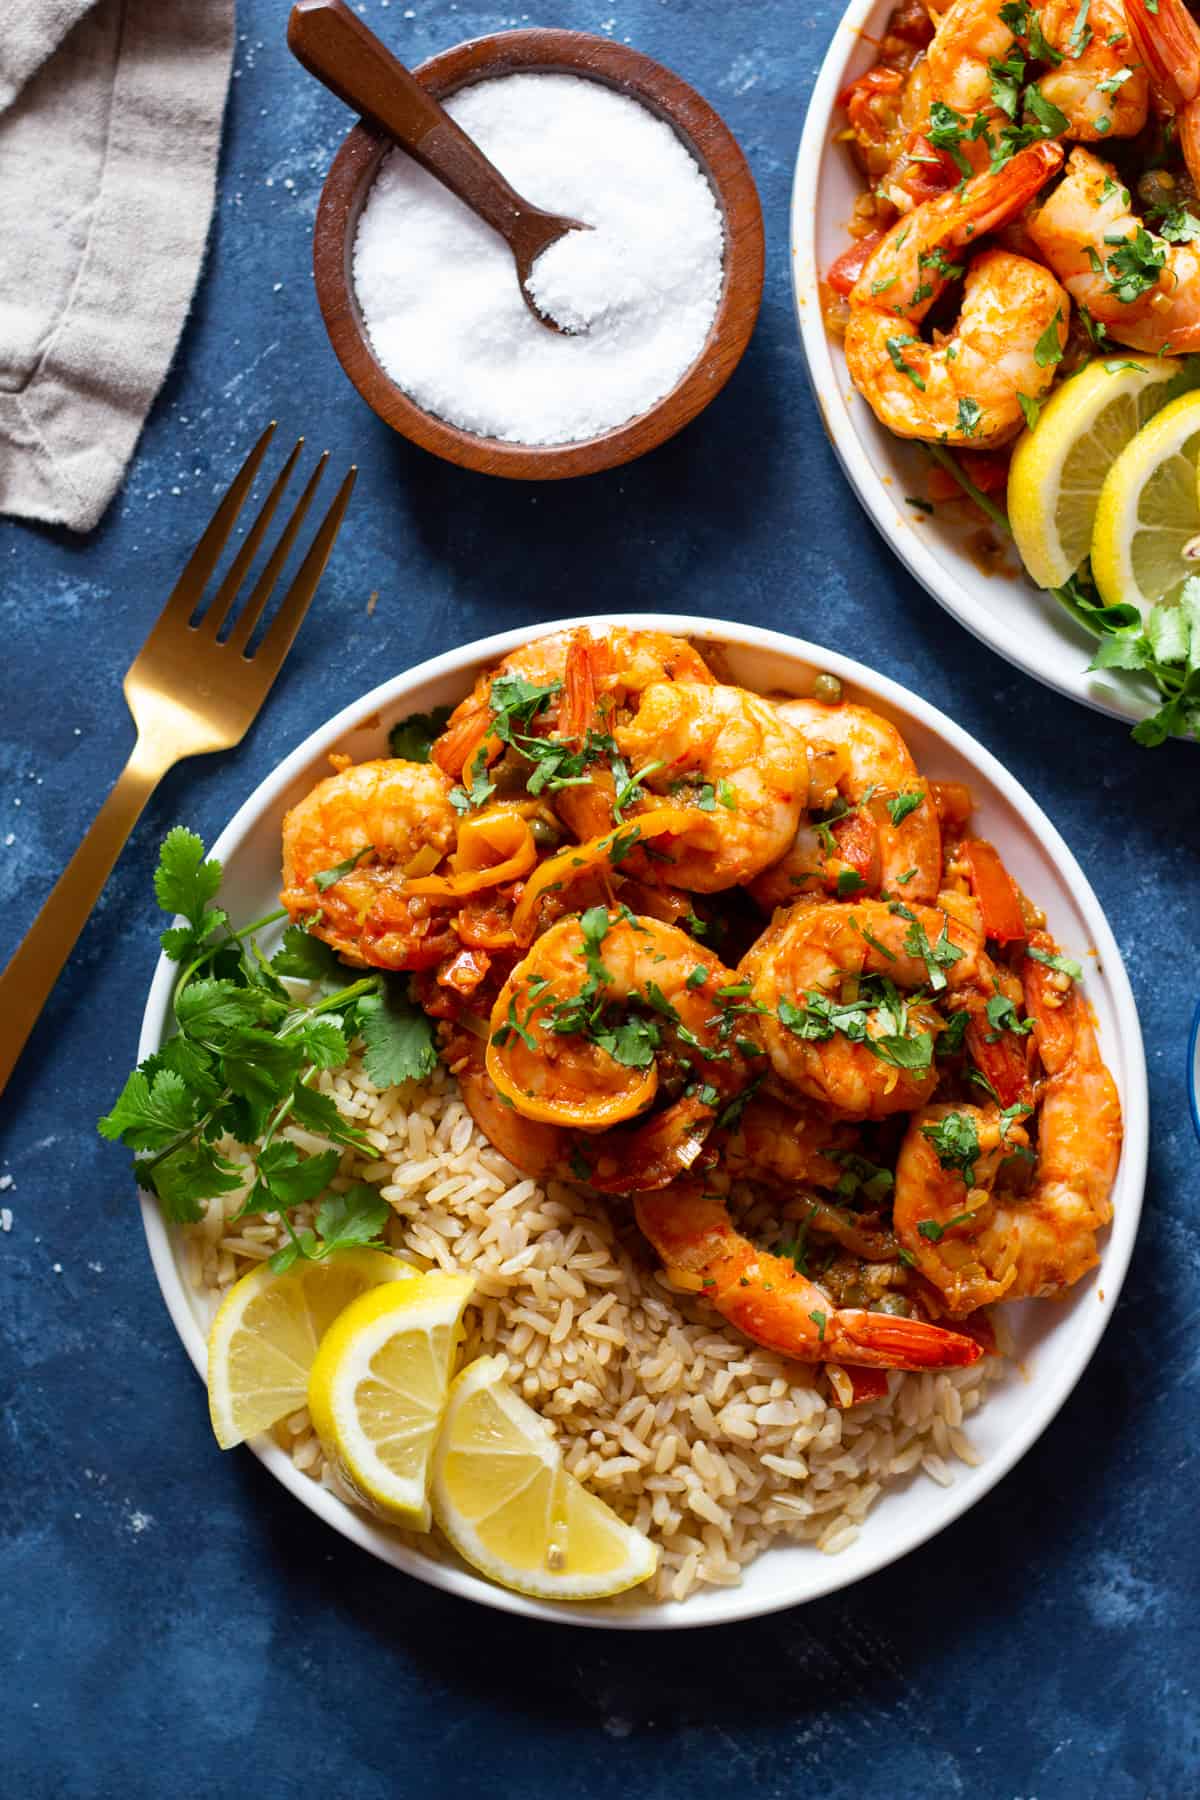 Sauteed shrimp recipe is easy and simple. You can make this recipe in 20 minutes. 